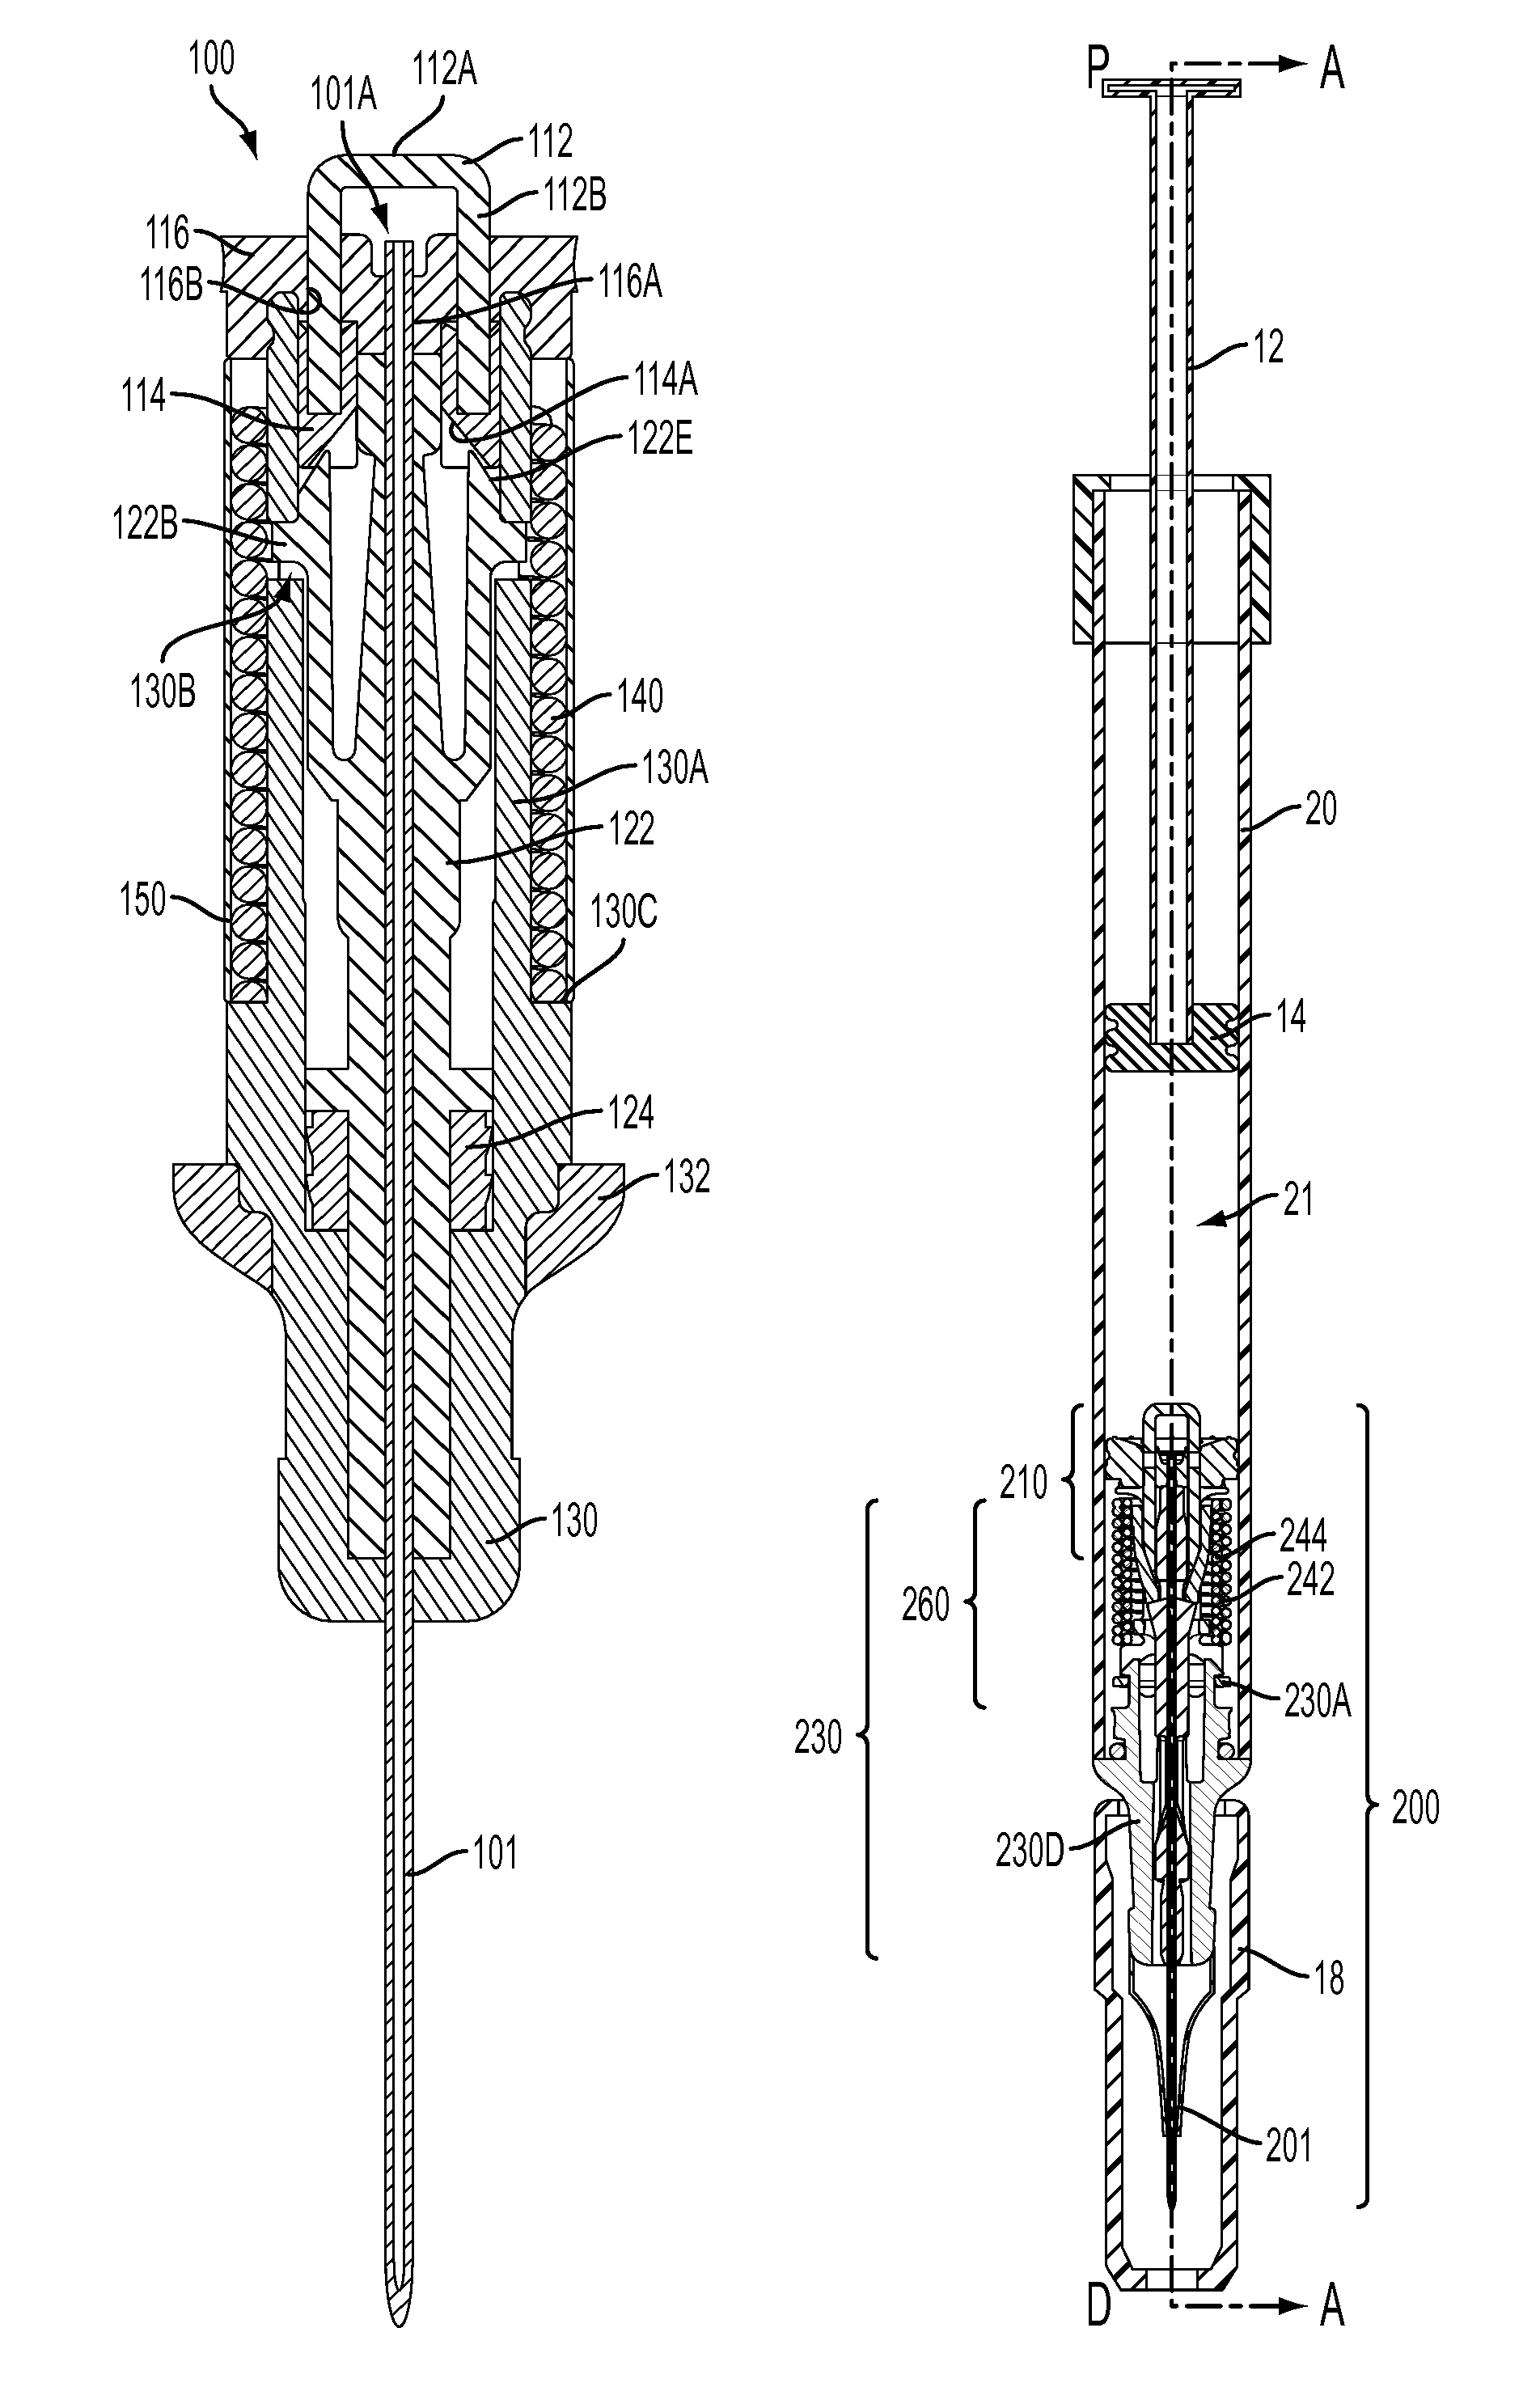 Retractable needle adapters and safety syringes